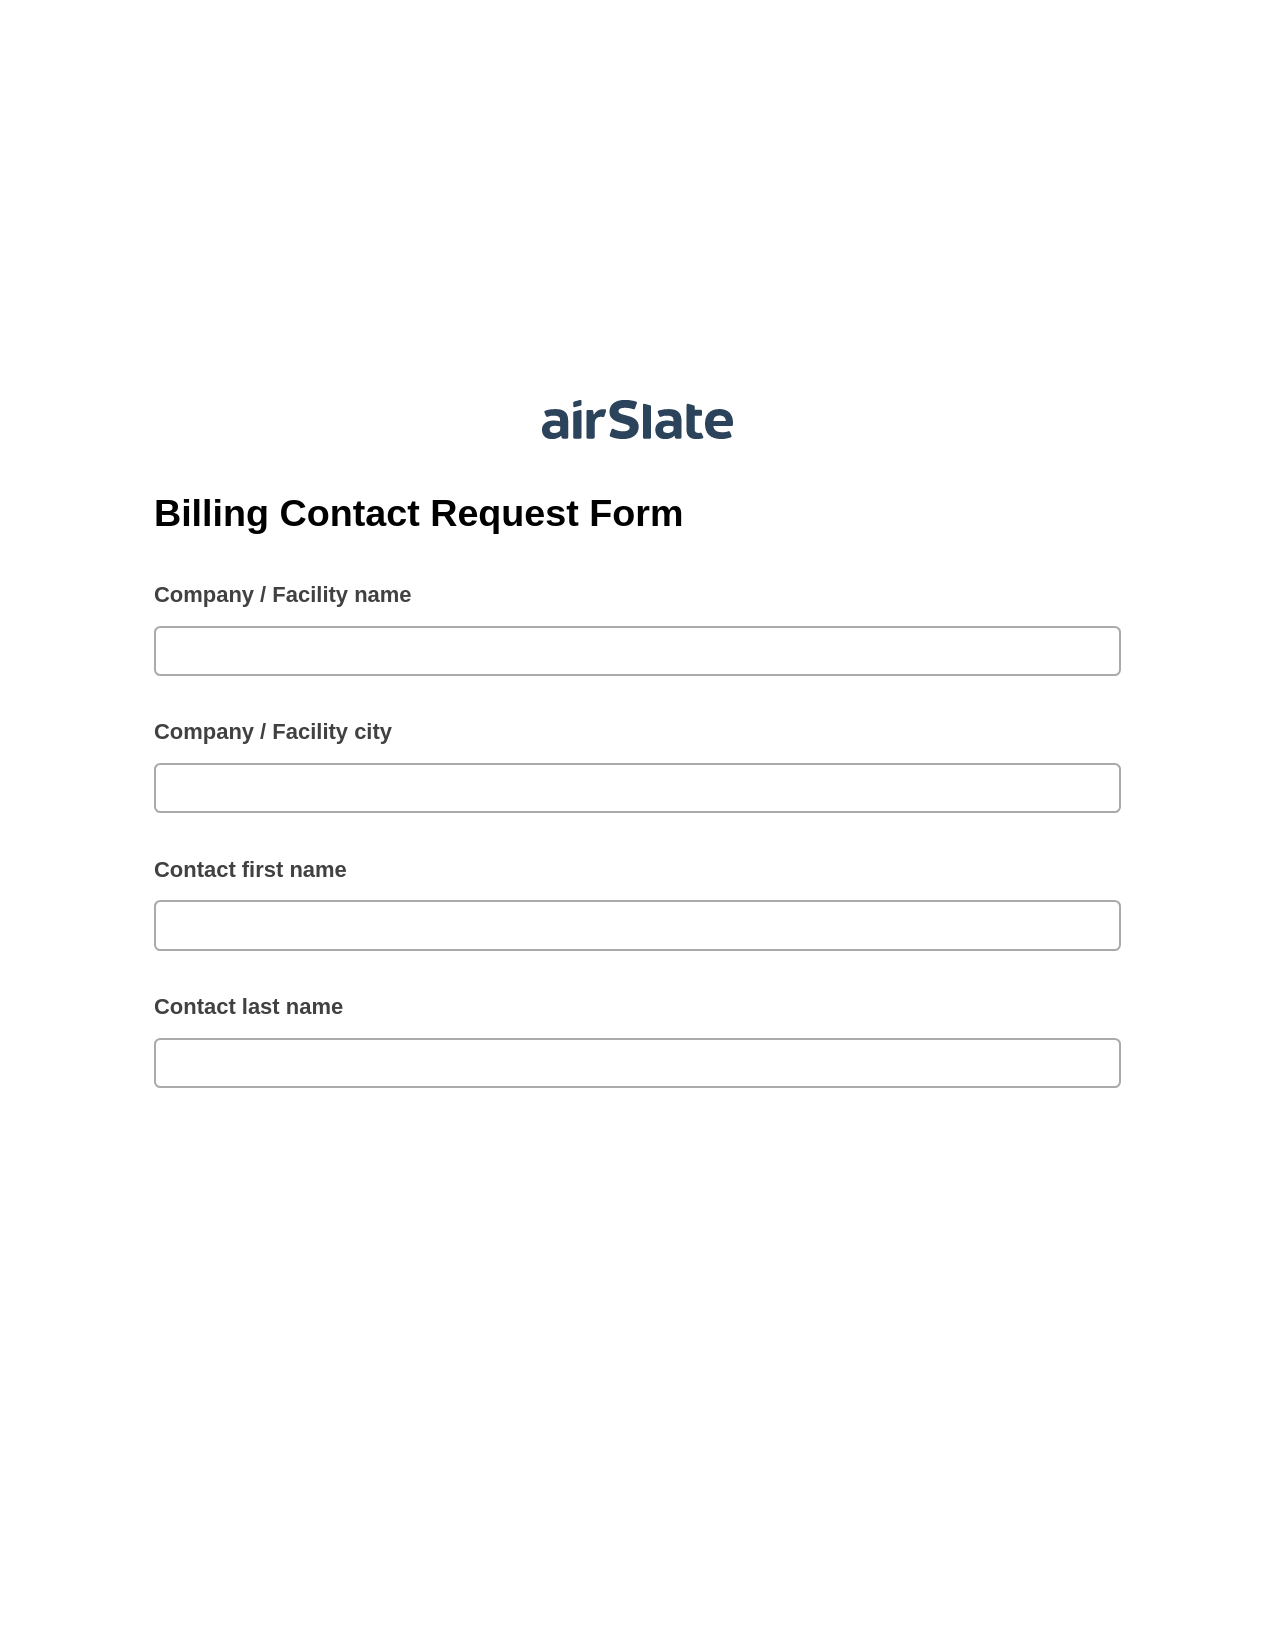 Multirole Billing Contact Request Form Pre-fill Slate from MS Dynamics 365 Records Bot, SendGrid send Campaign bot, Slack Two-Way Binding Bot